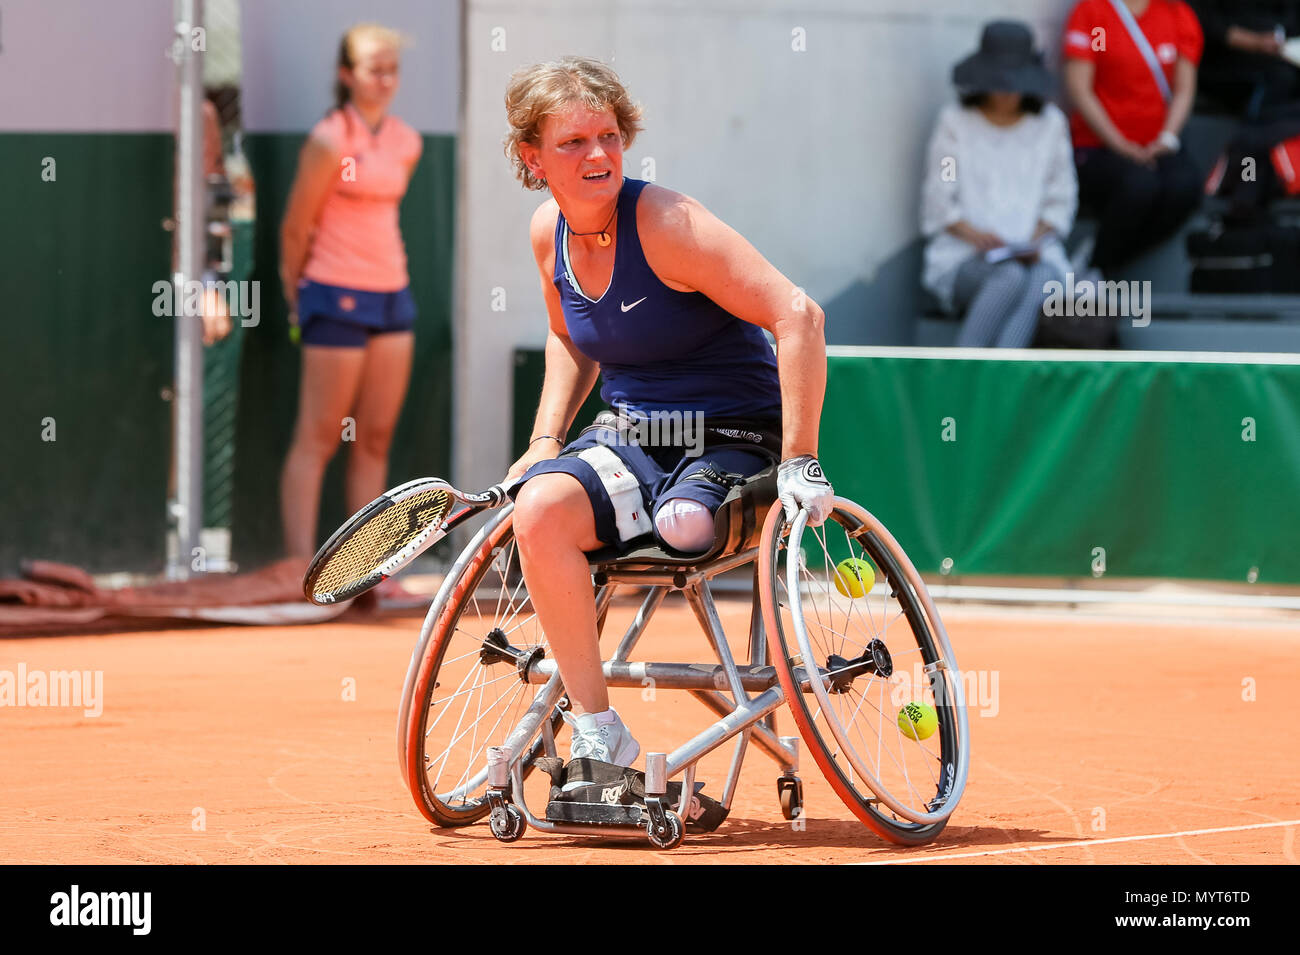 Paris, France. 7th June, 2018. Charlotte Famin (FRA) Tennis : Charlotte  Famin of France during the Women's wheelchair singles first round match of  the French Open tennis tournament against Yui Kamiji of